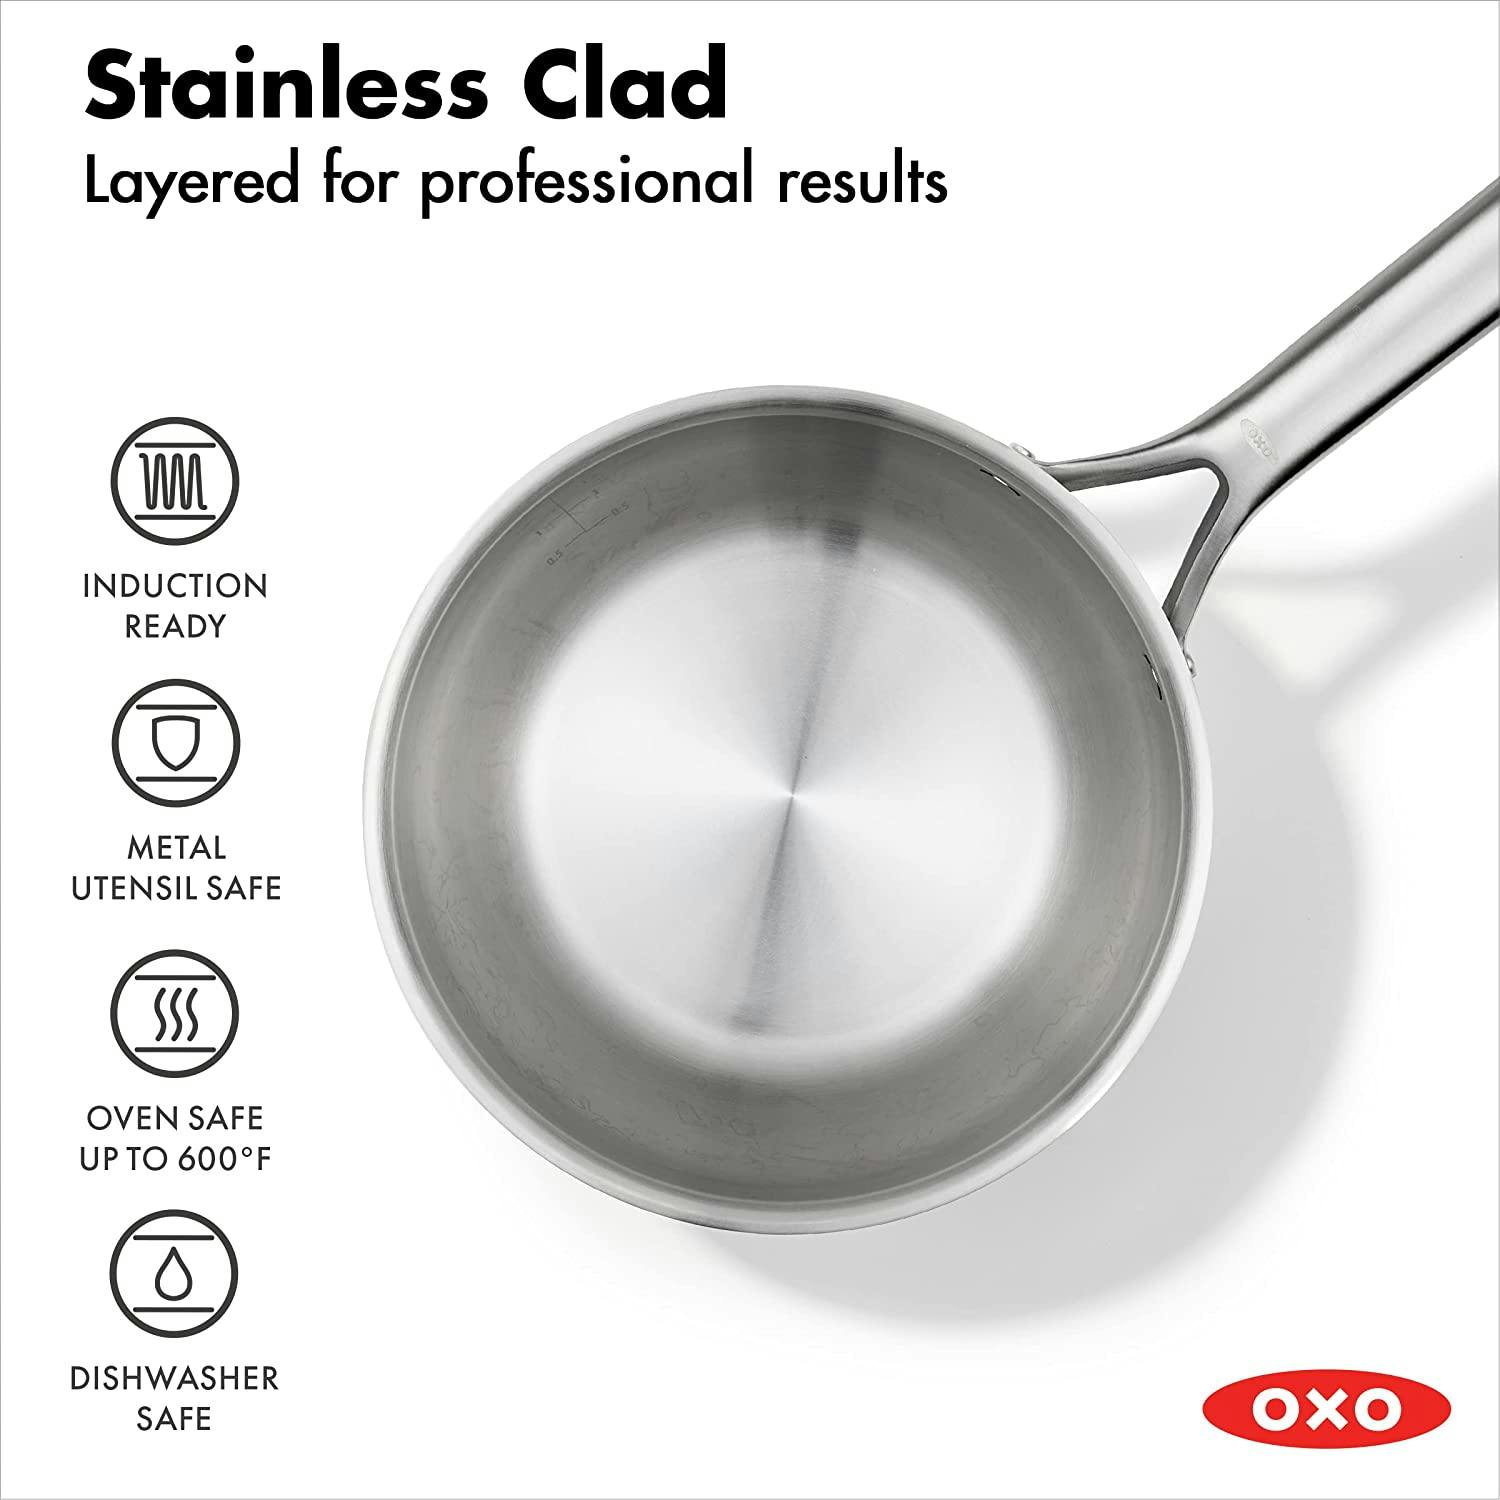 OXO Mira Tri-Ply Stainless Steel 1.5 QT. Chef's Pan with Lid